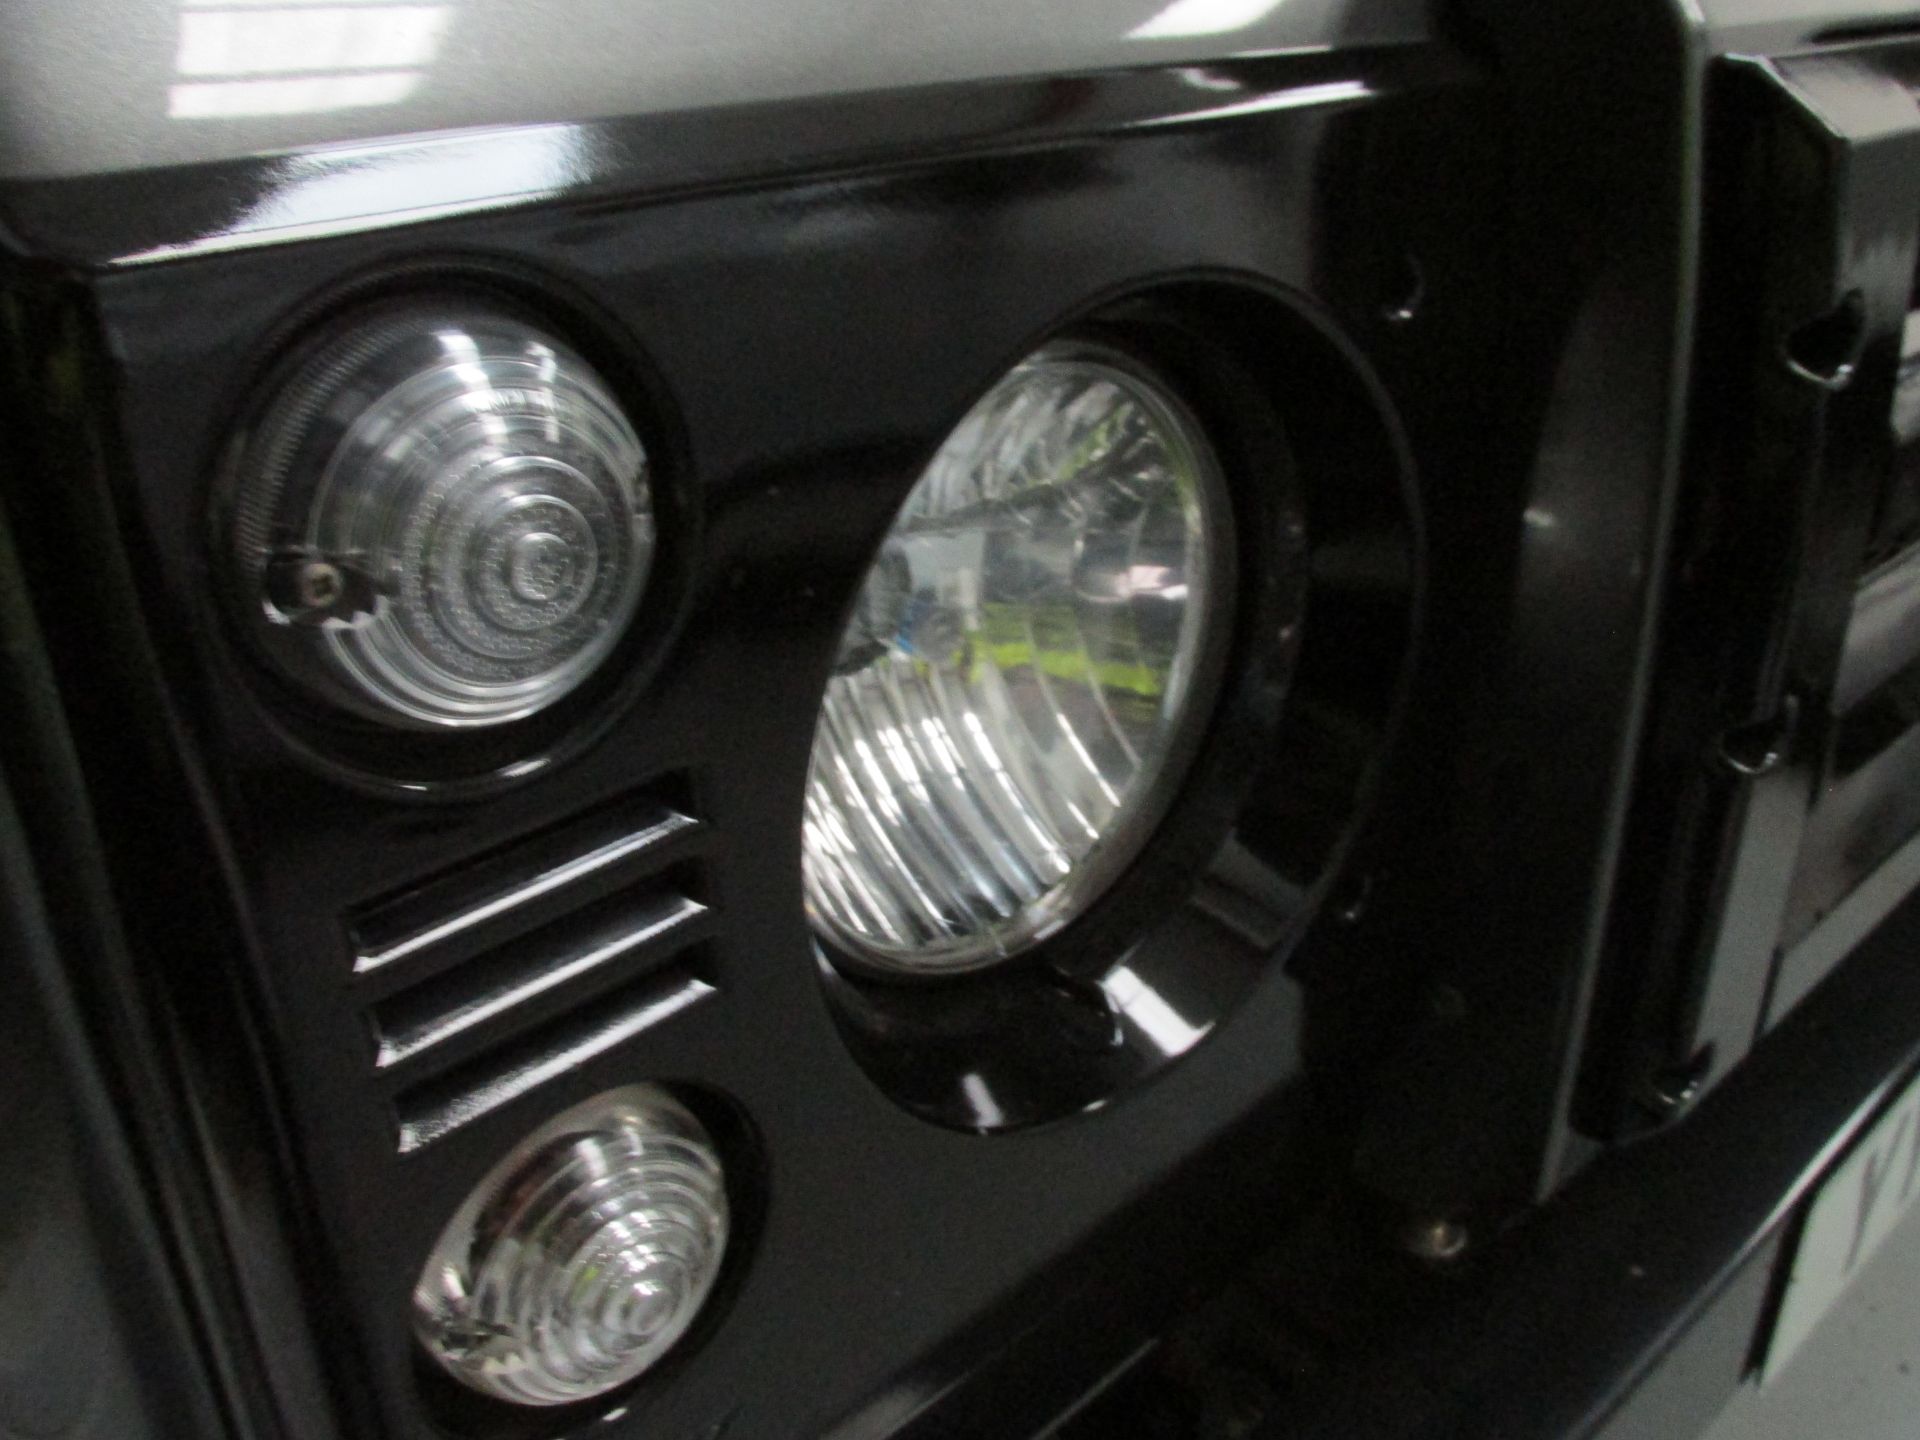 'TWISTED' - Rare Land Rover Defender Genuine PS 10 Built by Twisted Yorkshire - Image 16 of 50